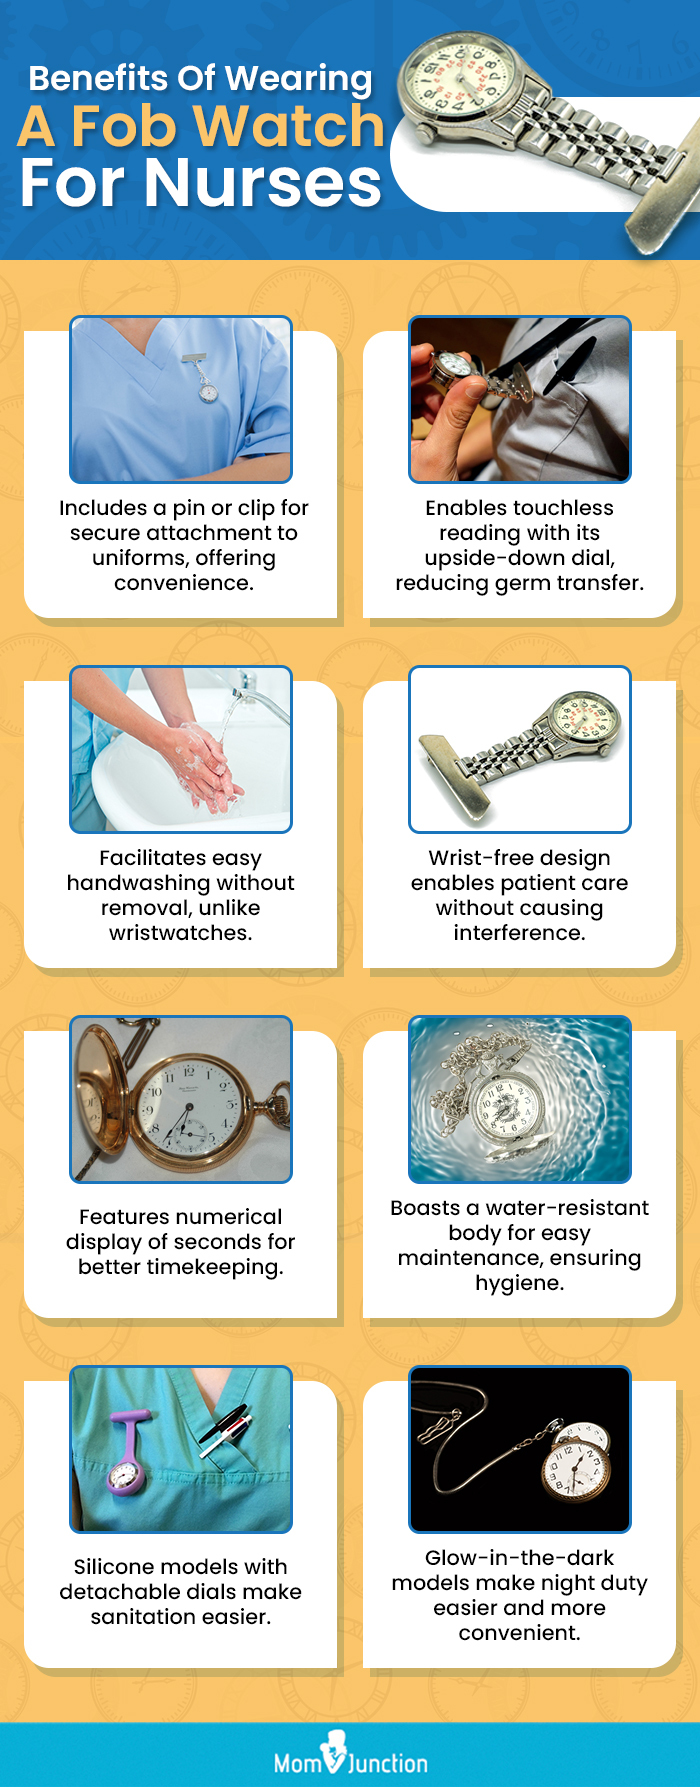 Benefits Of Wearing A Fob Watch For Nurses (infographic)